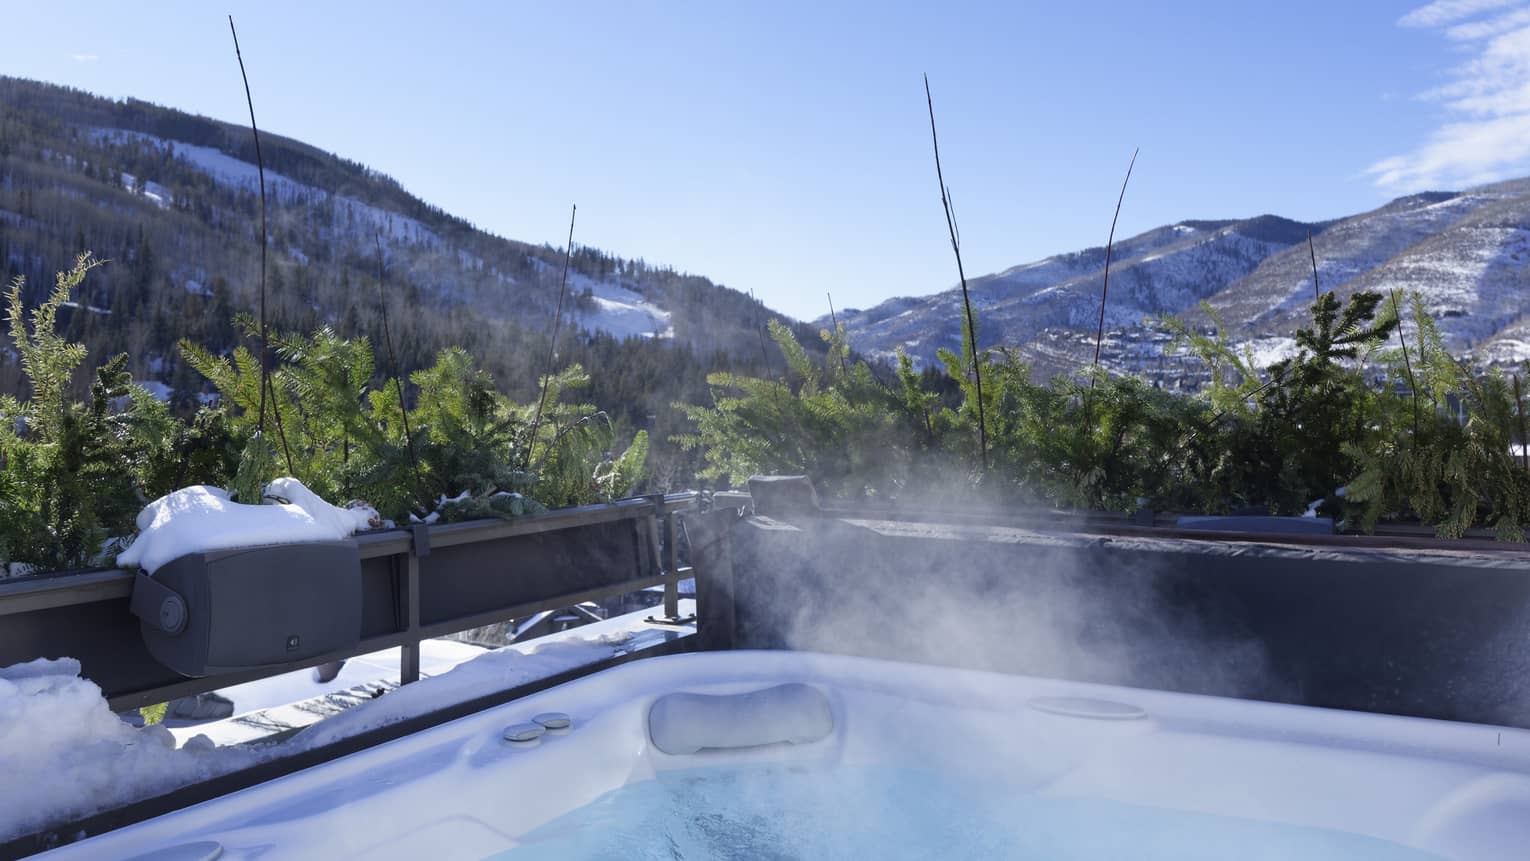 Hot tub with mountain view